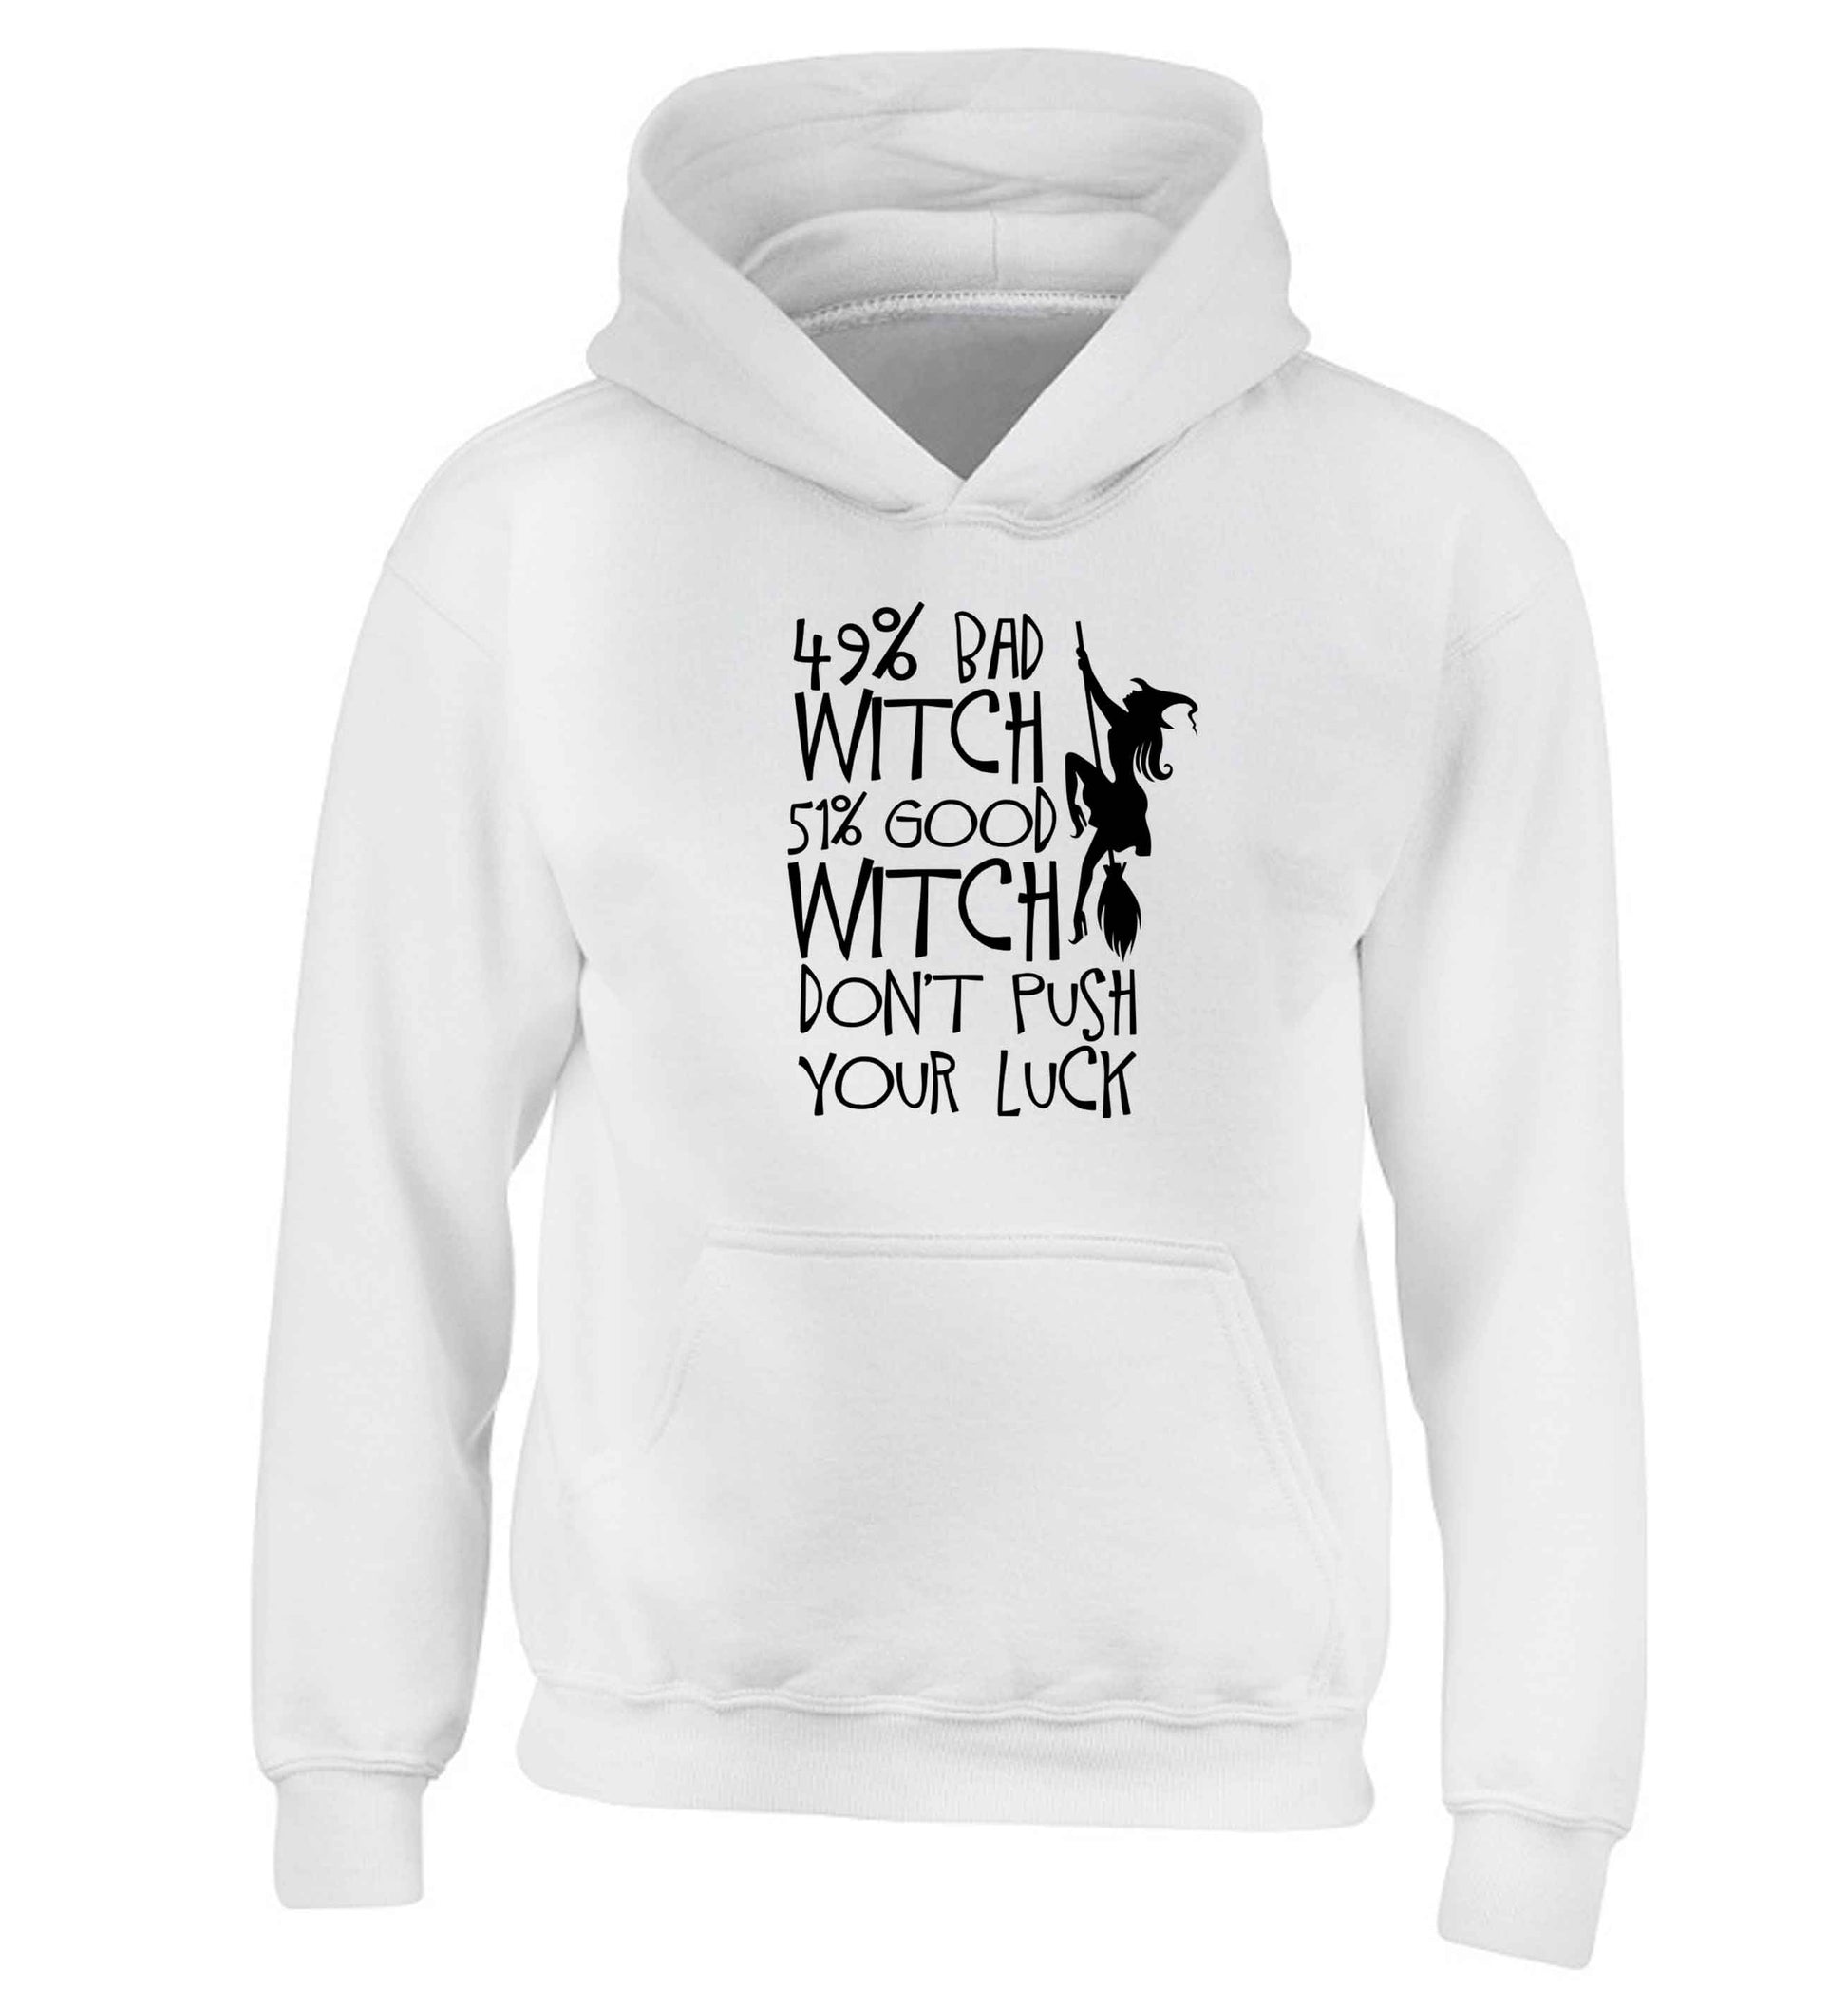 49% bad witch 51% good witch don't push your luck children's white hoodie 12-13 Years